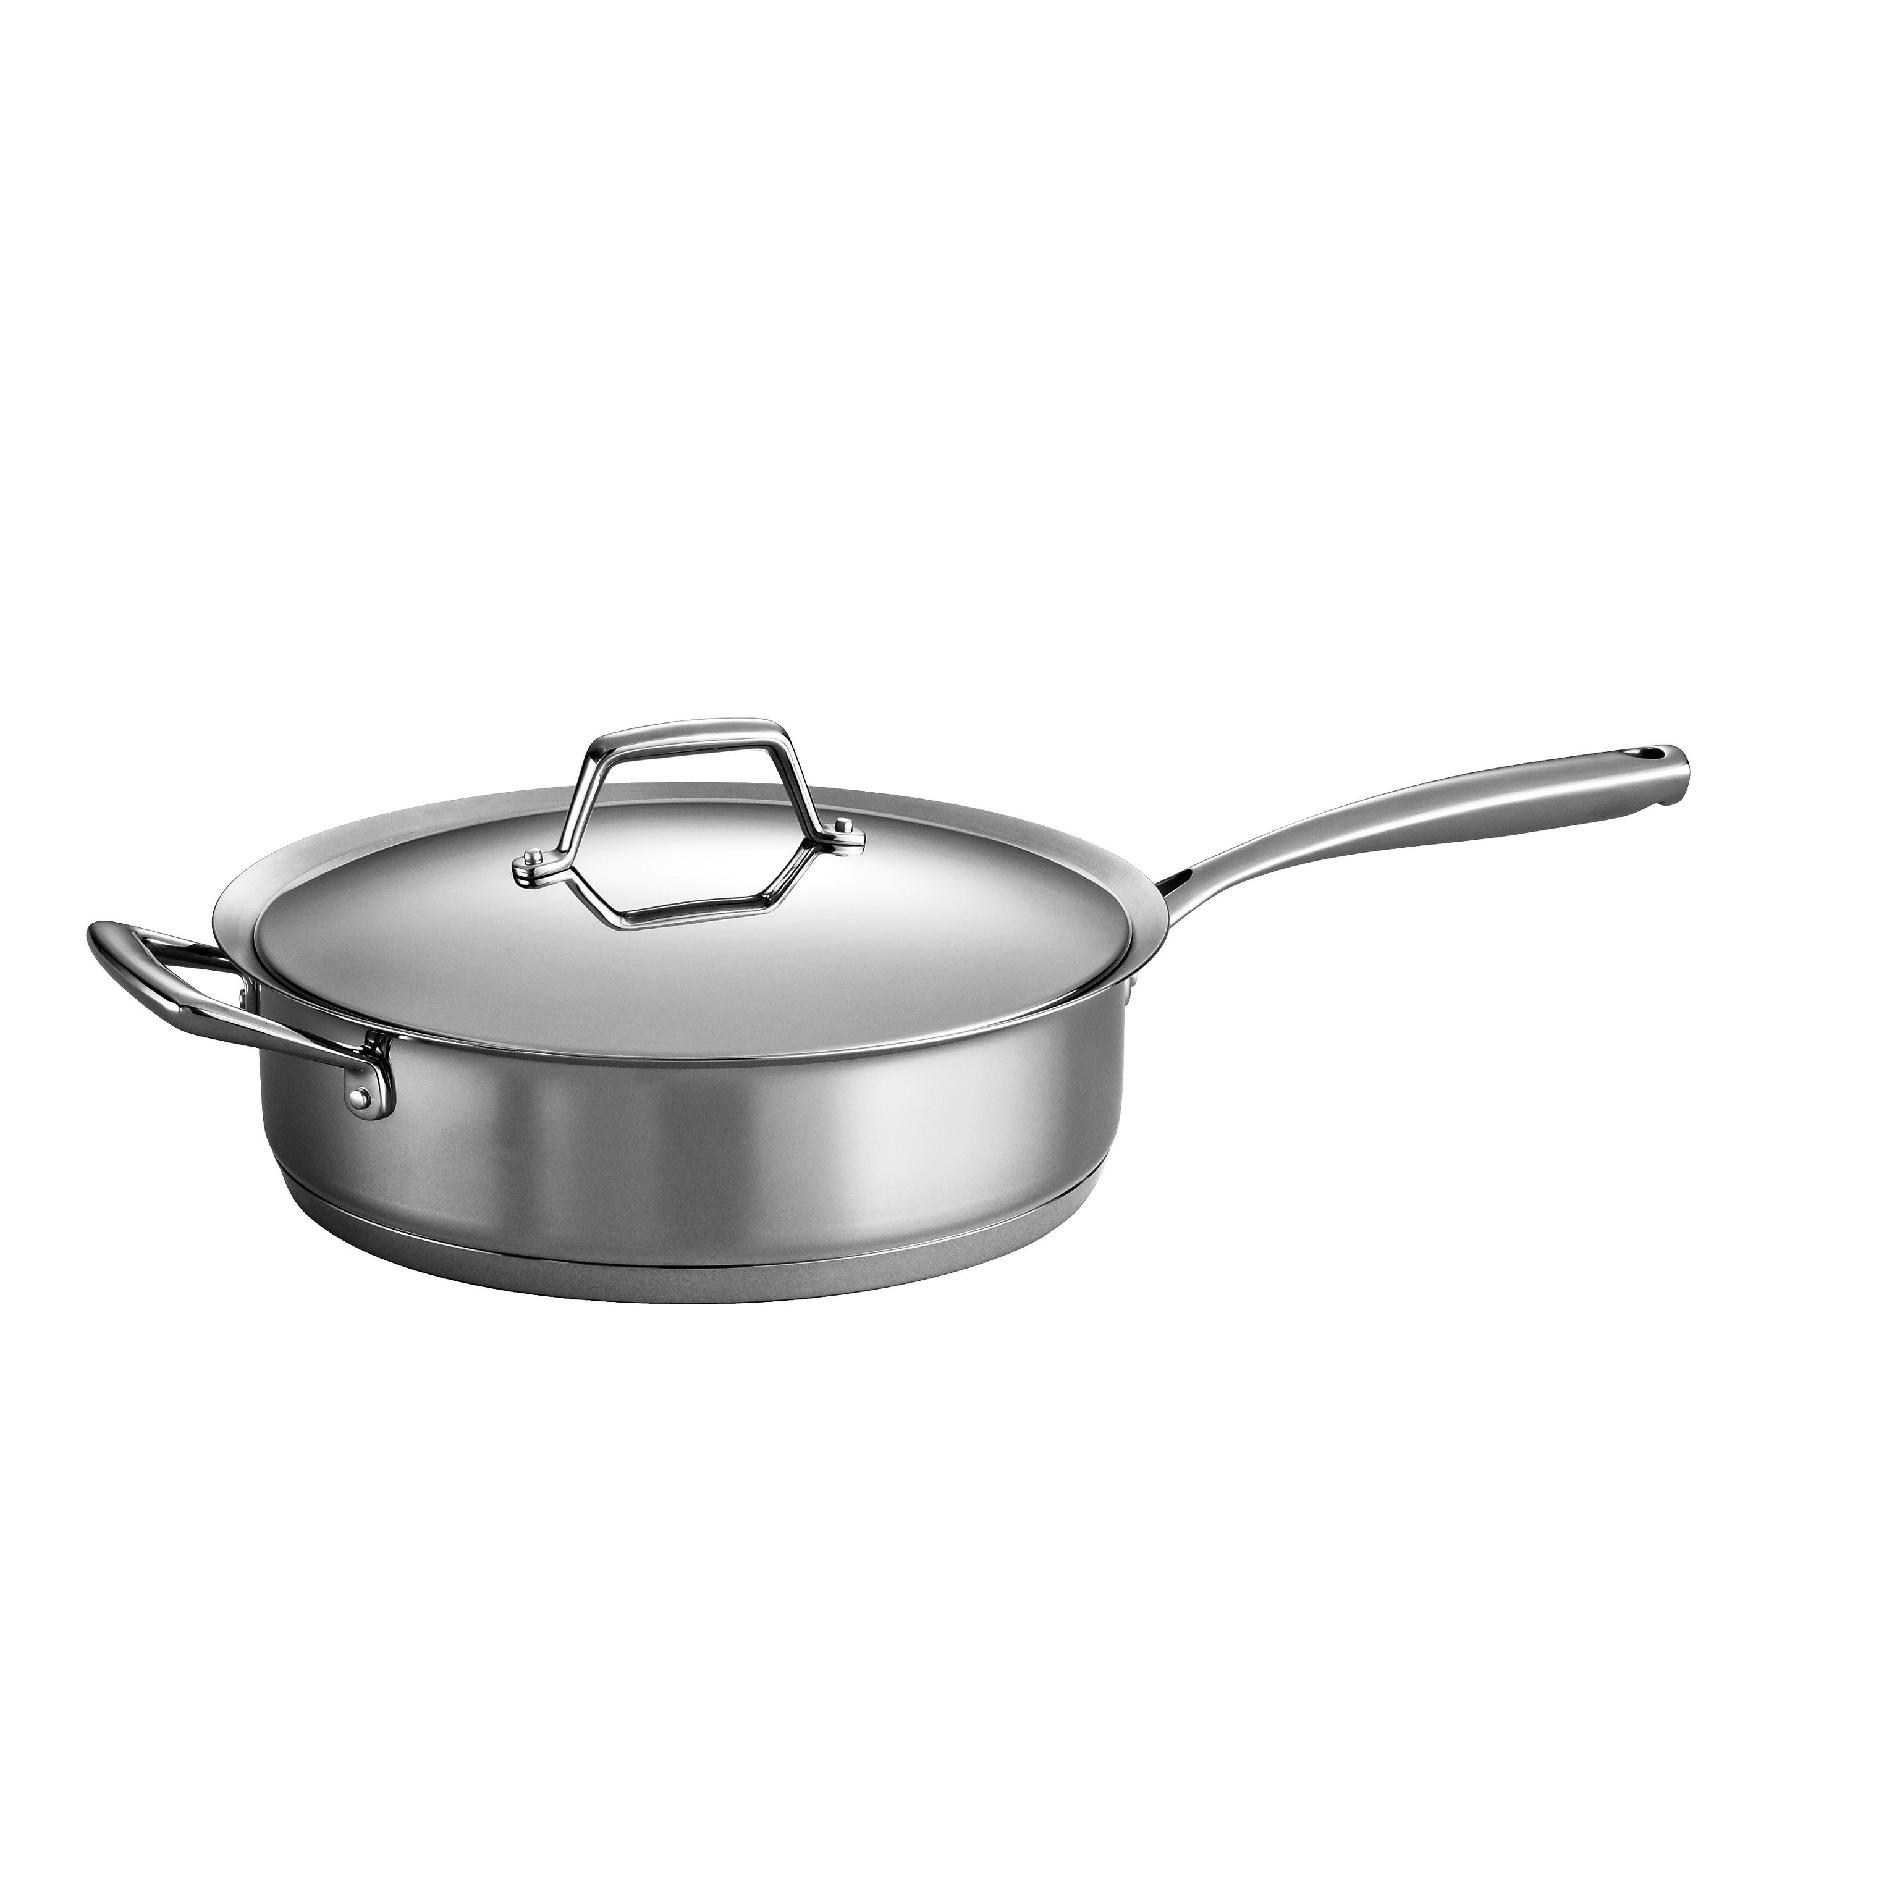 0016017060685 - GOURMET PRIMA 18/10 STAINLESS STEEL 5 QT COVERED DEEP SAUTE PAN